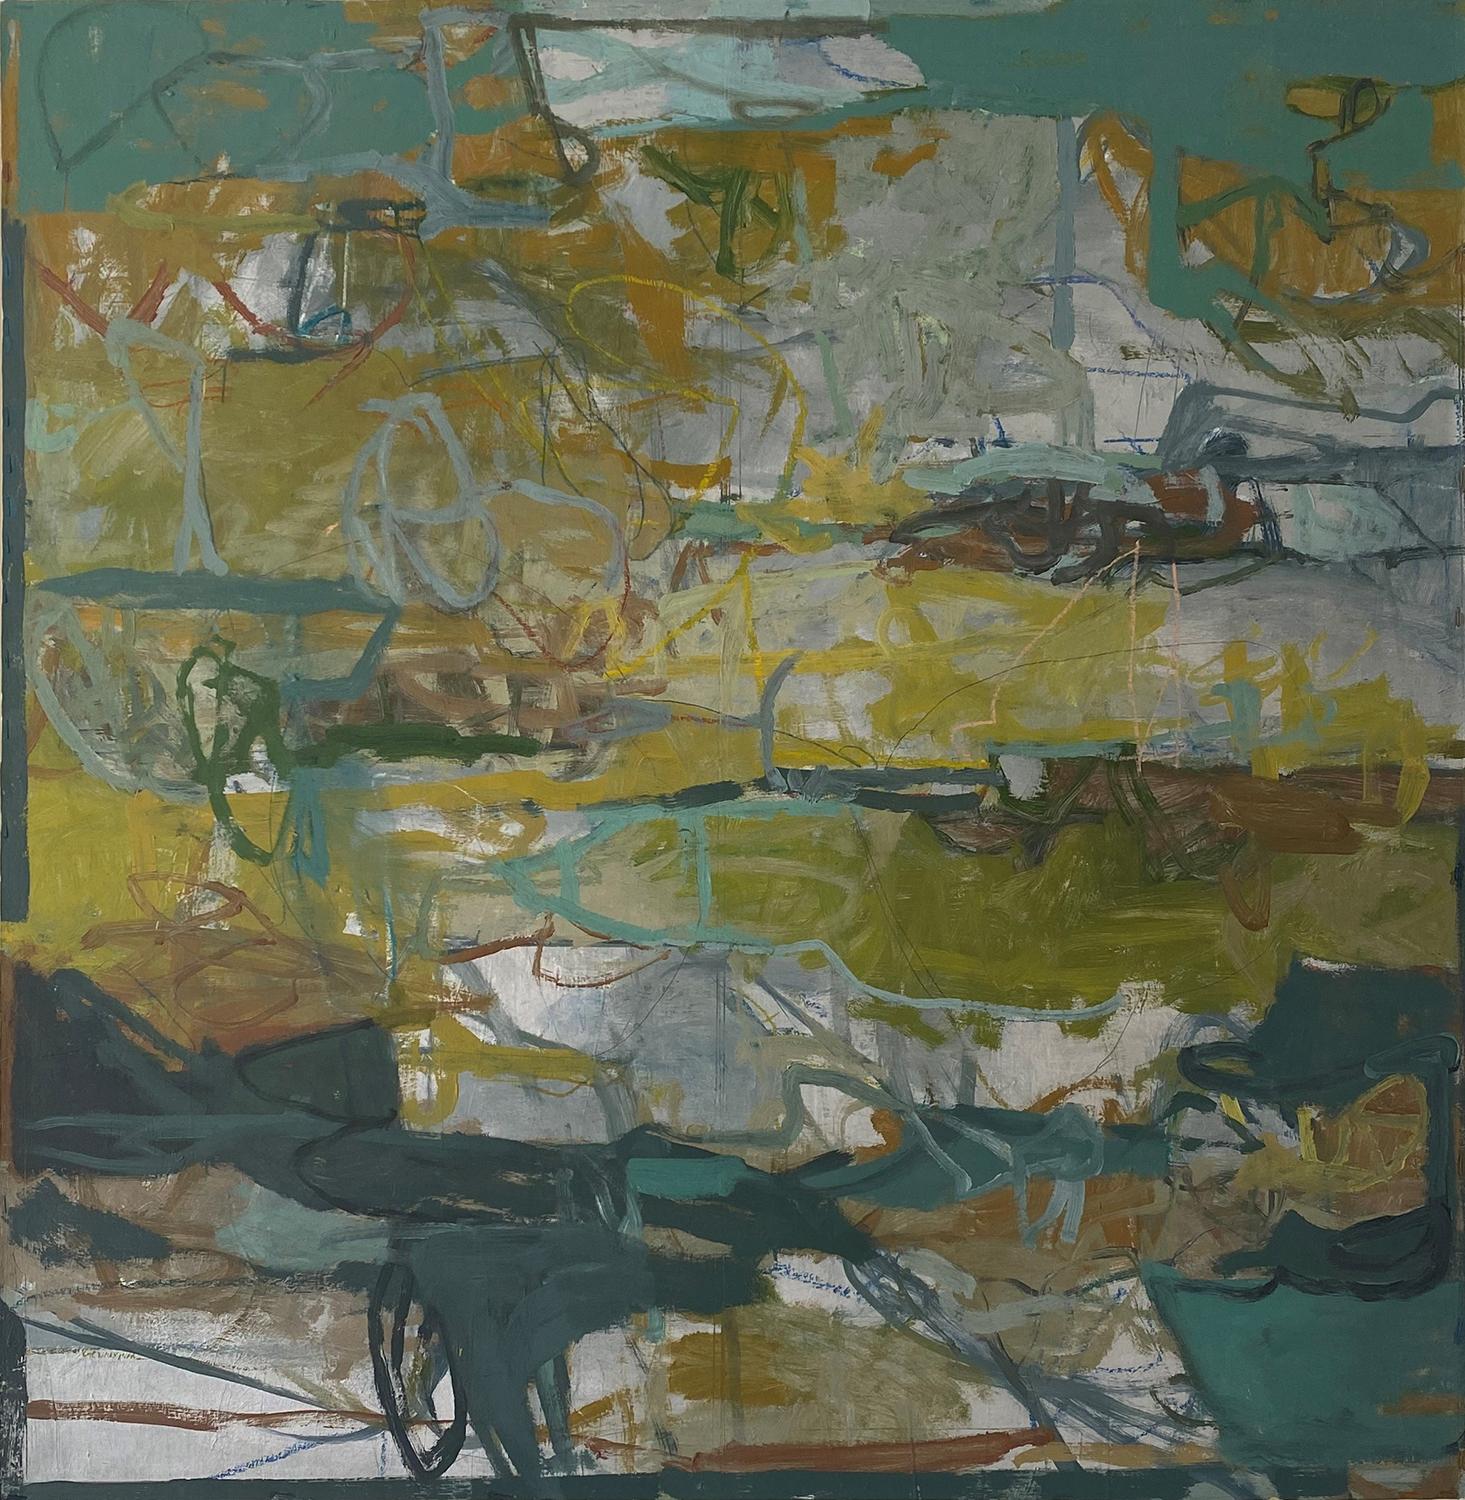 James O'Shea Abstract Painting - Corlear's (Abstract Oil Painting on Canvas in Green, Blue & Grey)